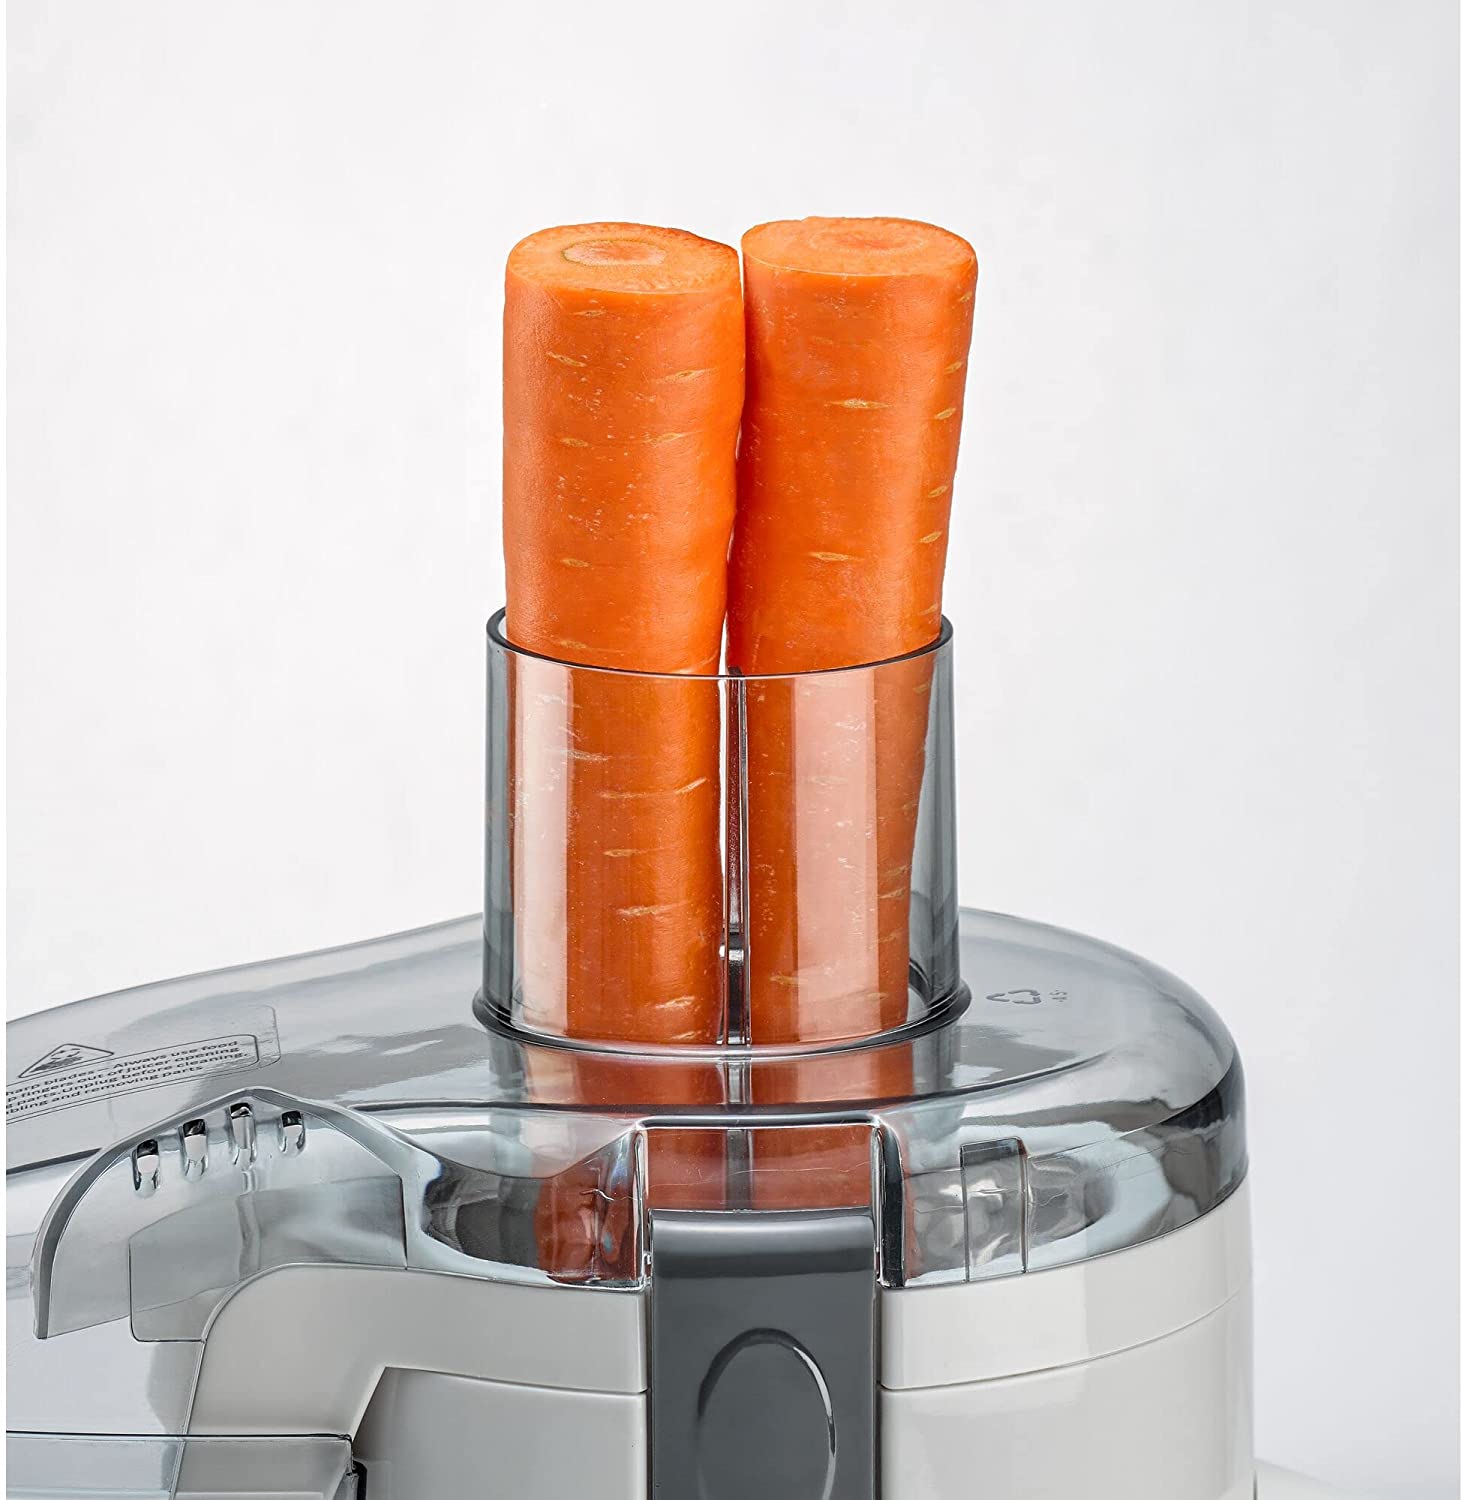 Black+Decker Juicer Extractor with Large Feeding Chute 250W | in Bahrain | Home Appliance | Halabh.com